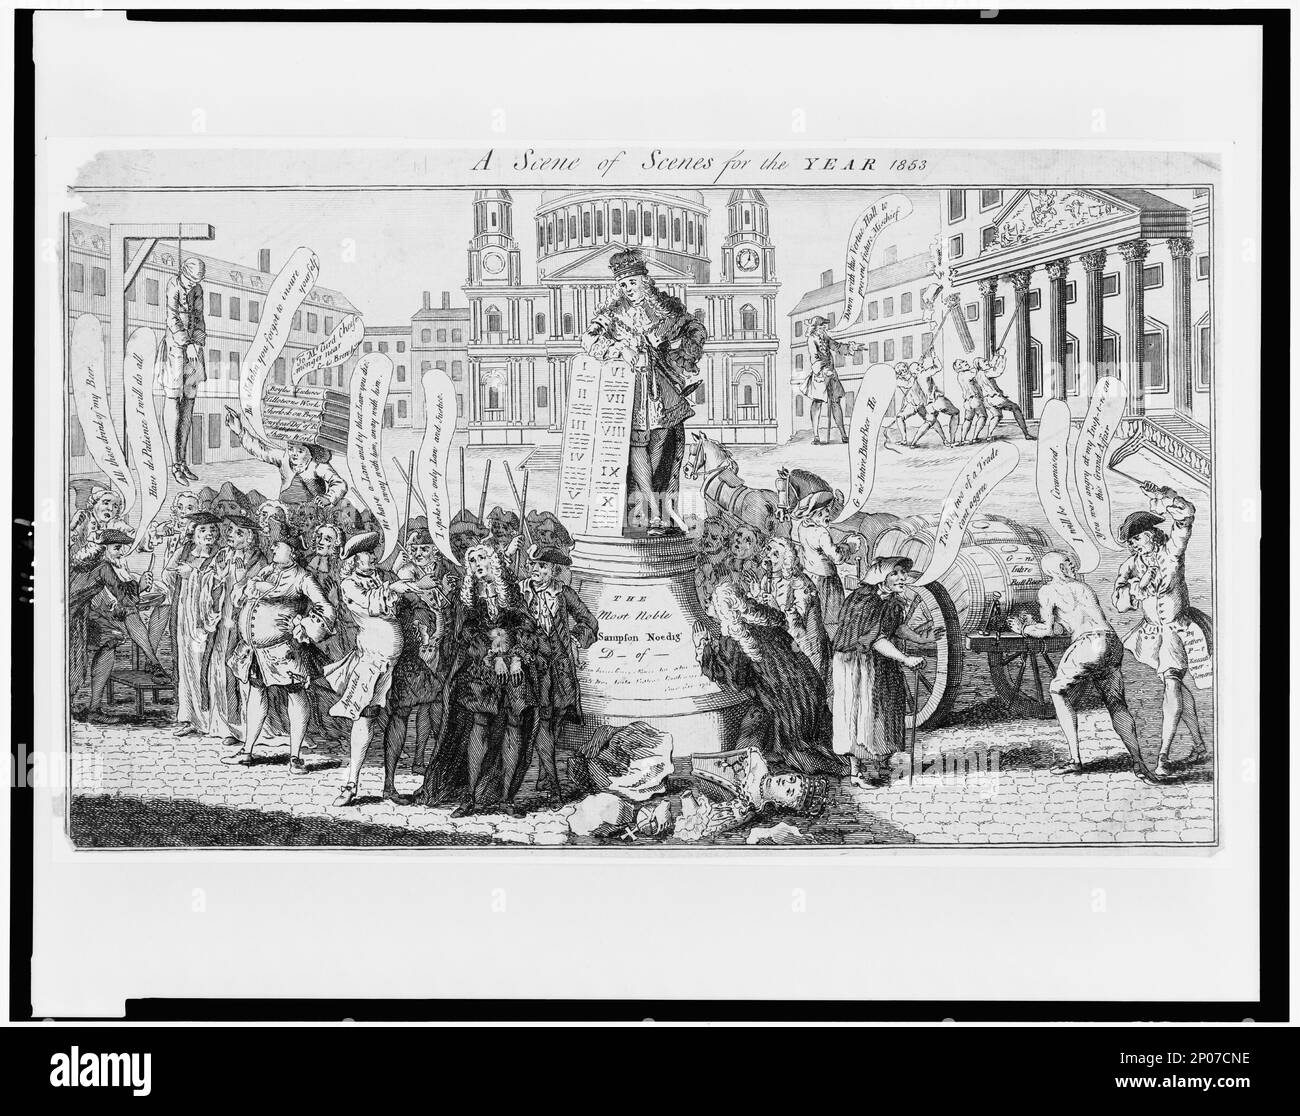 A scene of scenes for the year 1853. British Cartoon Prints Collection . St. Paul's Cathedral (London, England) , Crowds,England,London,1750-1760. Stock Photo